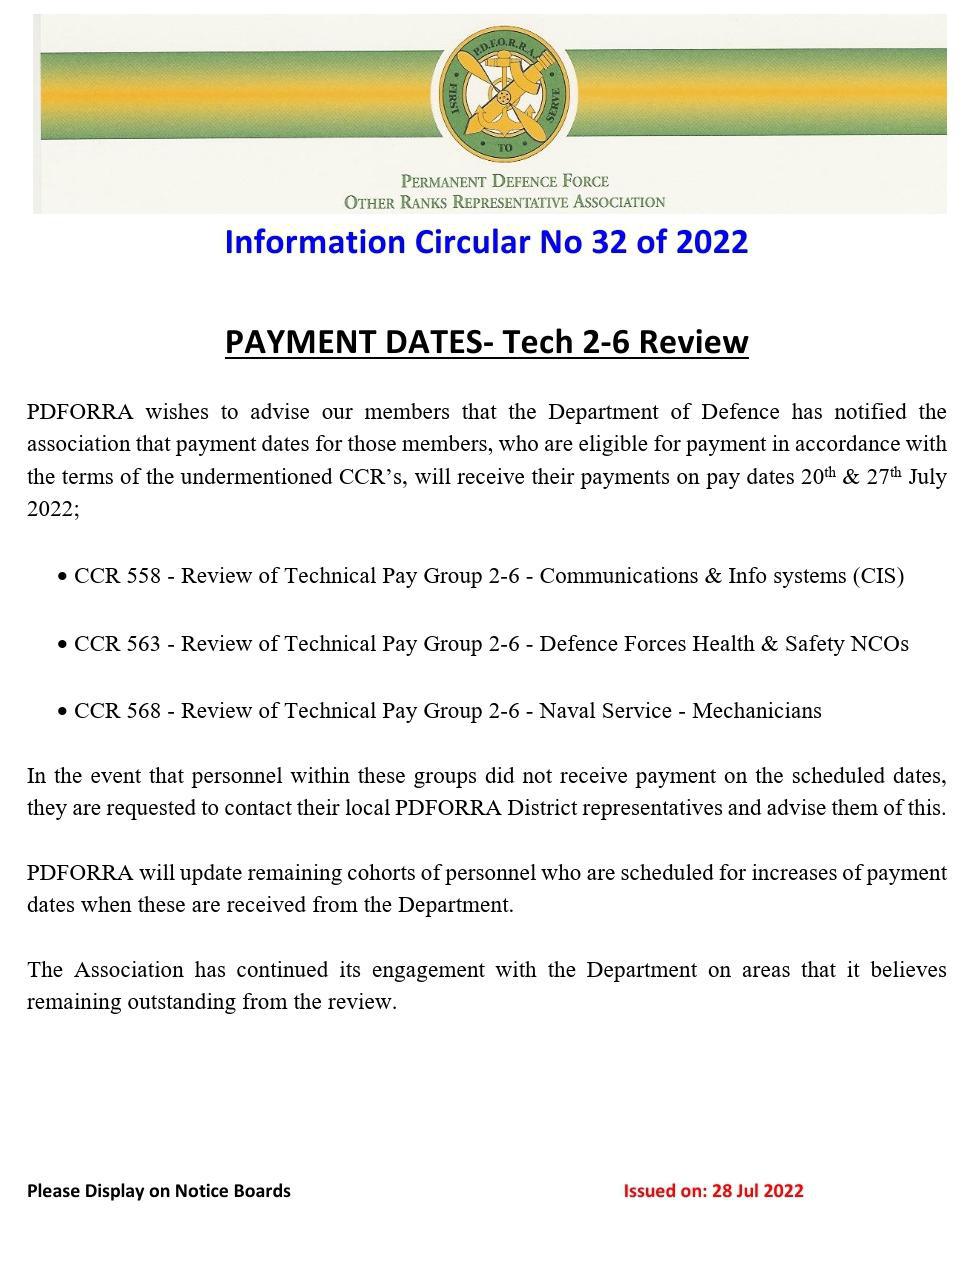 Information Circular No 32 of 22 - Payment Dates Tech 2 to 6 Review